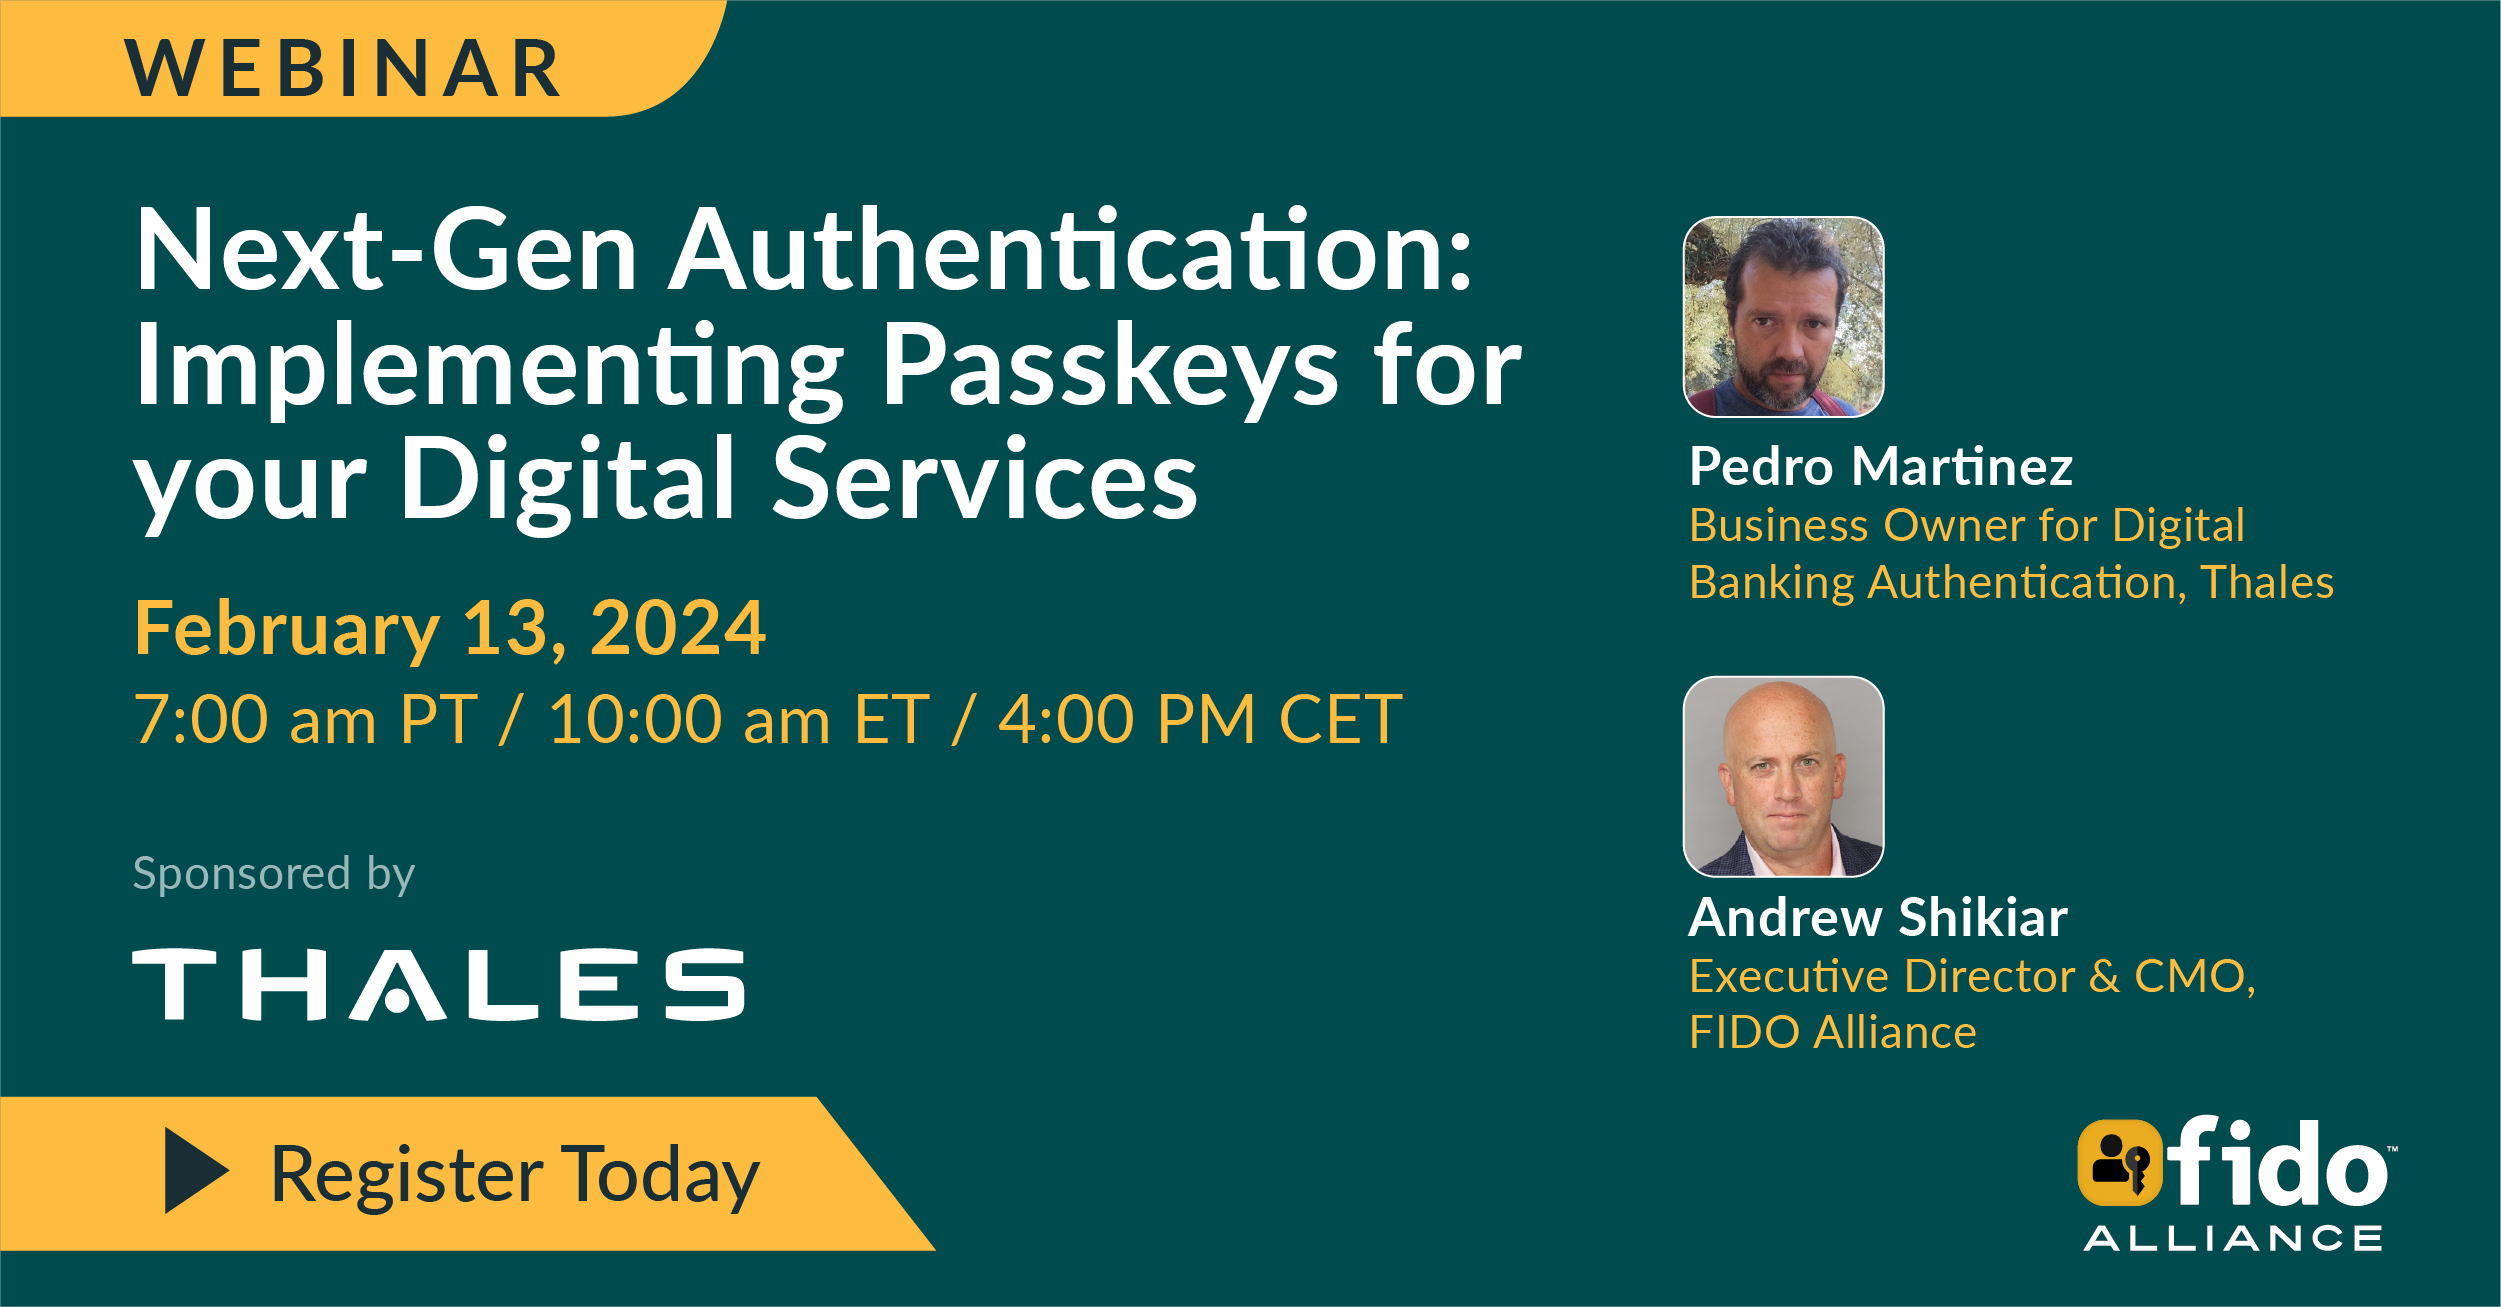 Webinar: Next-Gen Authentication: Implementing Passkeys for your Digital Services